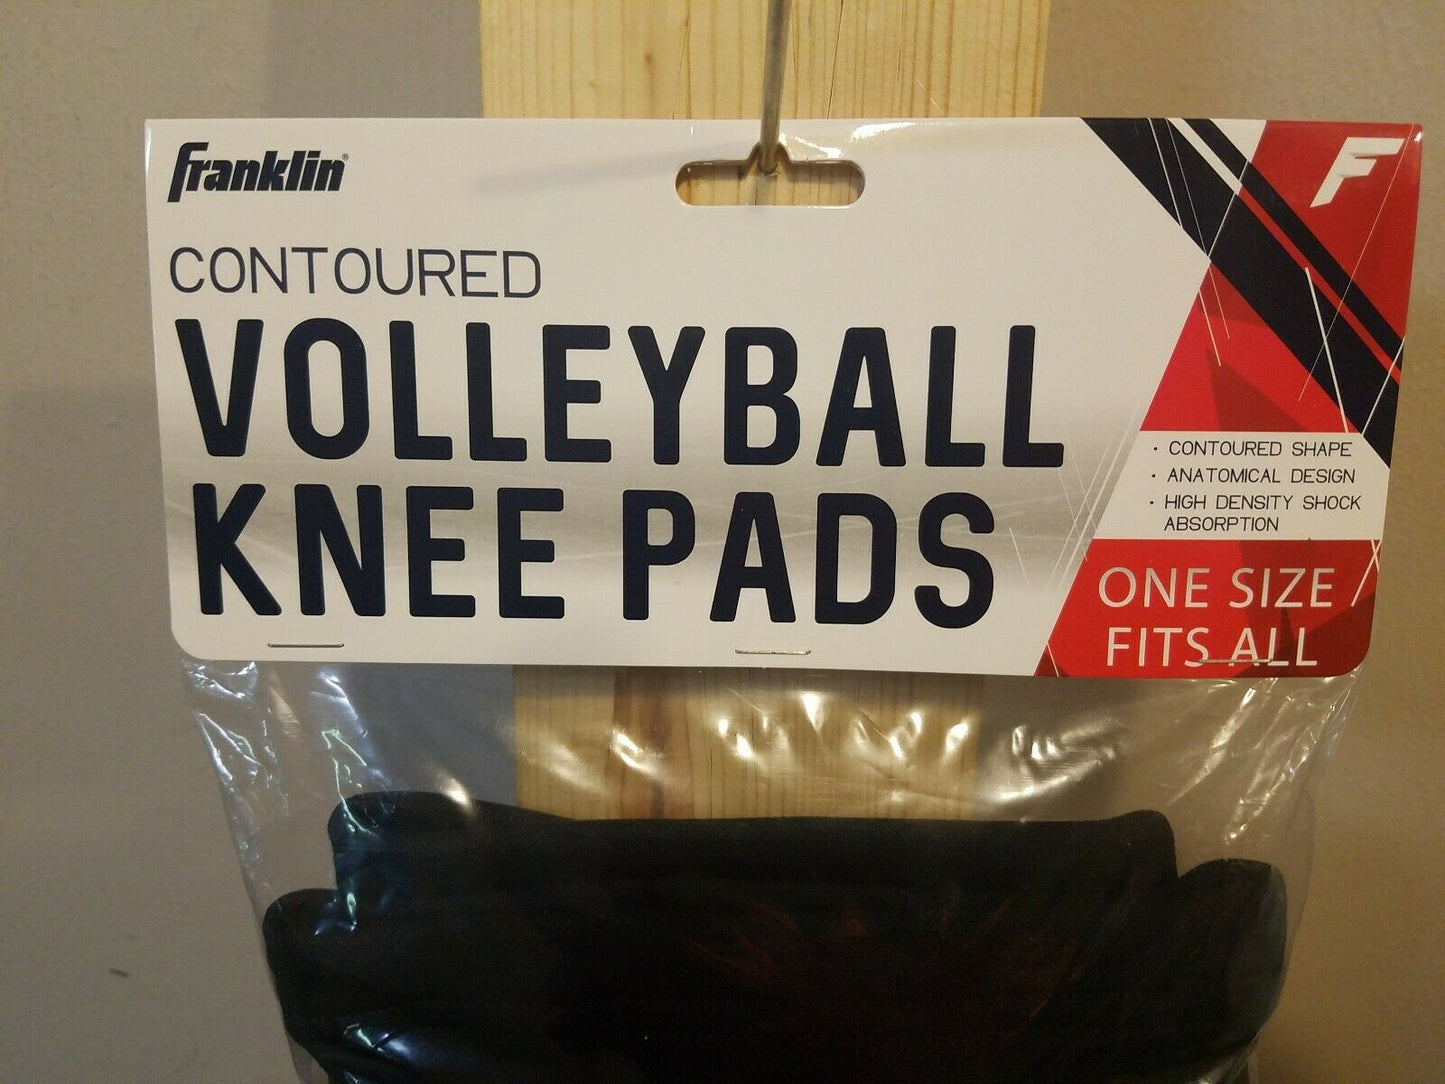 Franklin Contoured Volleyball Knee Pads One-size-fits-all